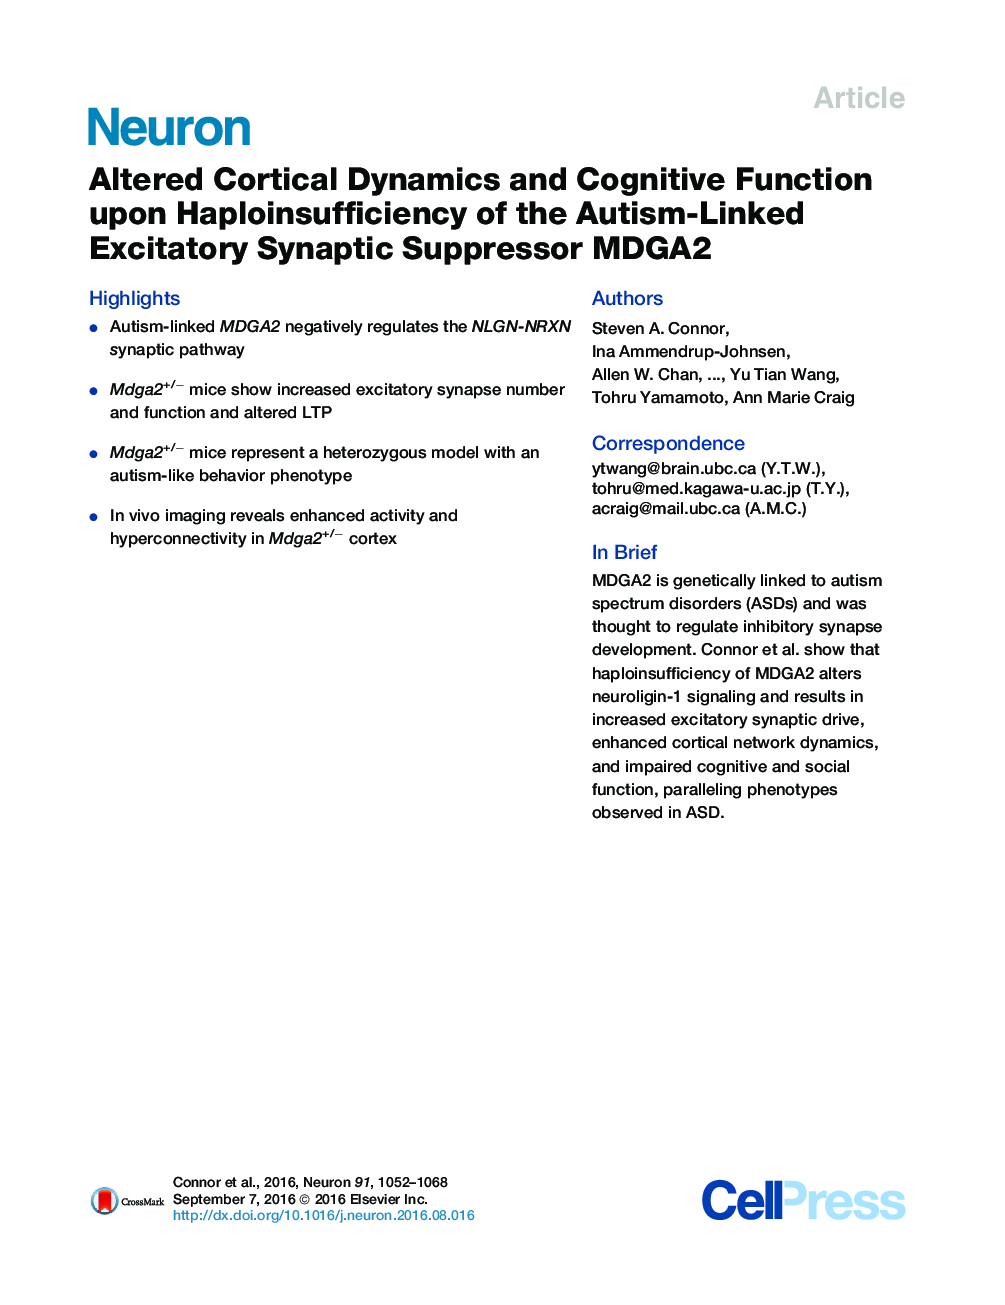 Altered Cortical Dynamics and Cognitive Function upon Haploinsufficiency of the Autism-Linked Excitatory Synaptic Suppressor MDGA2